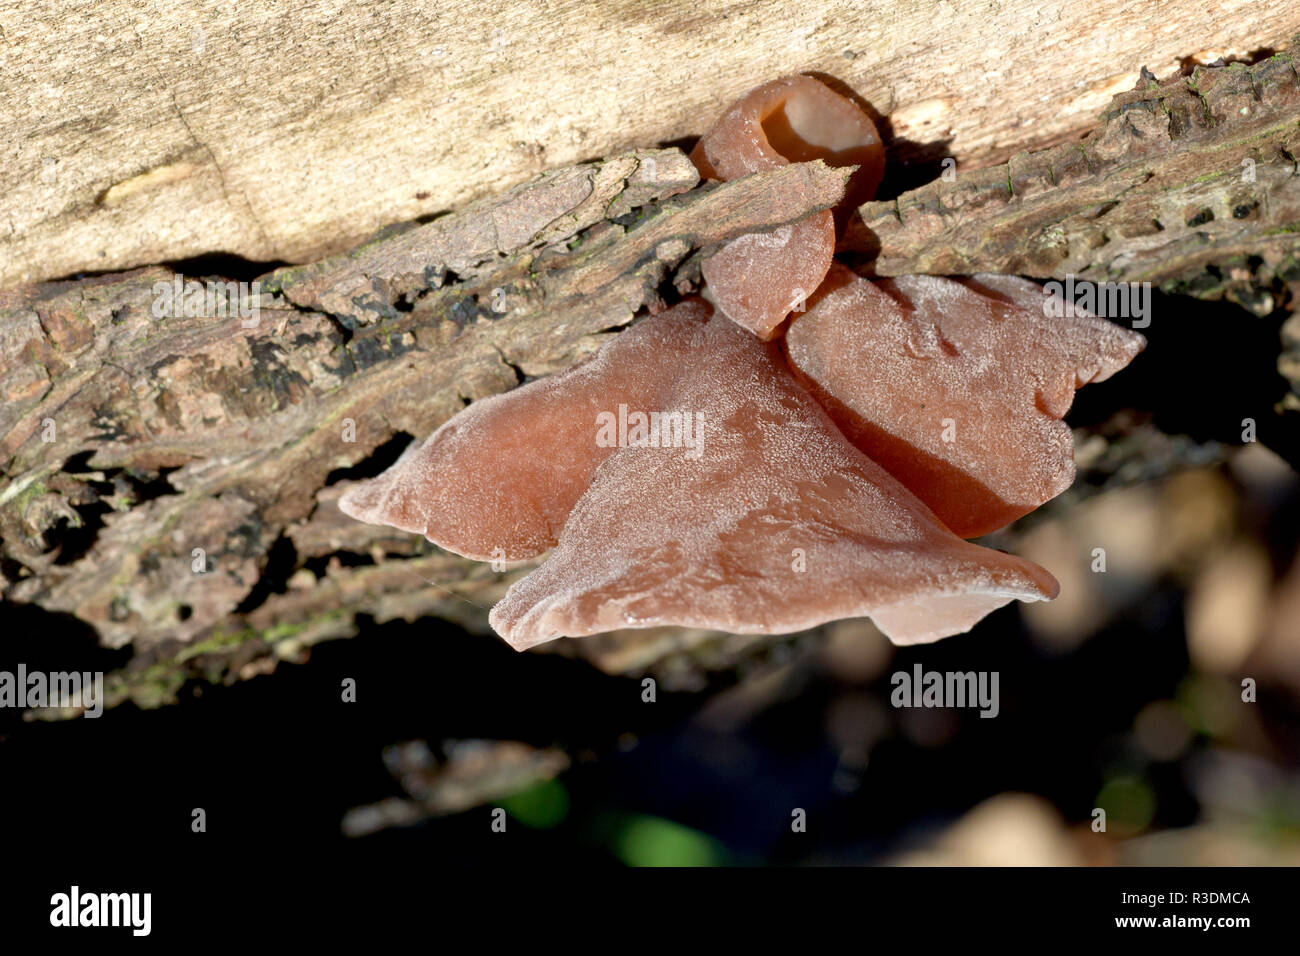 Close up of Hirneola Auricula-judae fungi growing on a fallen tree. Formerly known as Jew's Ear, now commonly called Jelly Ear. Stock Photo